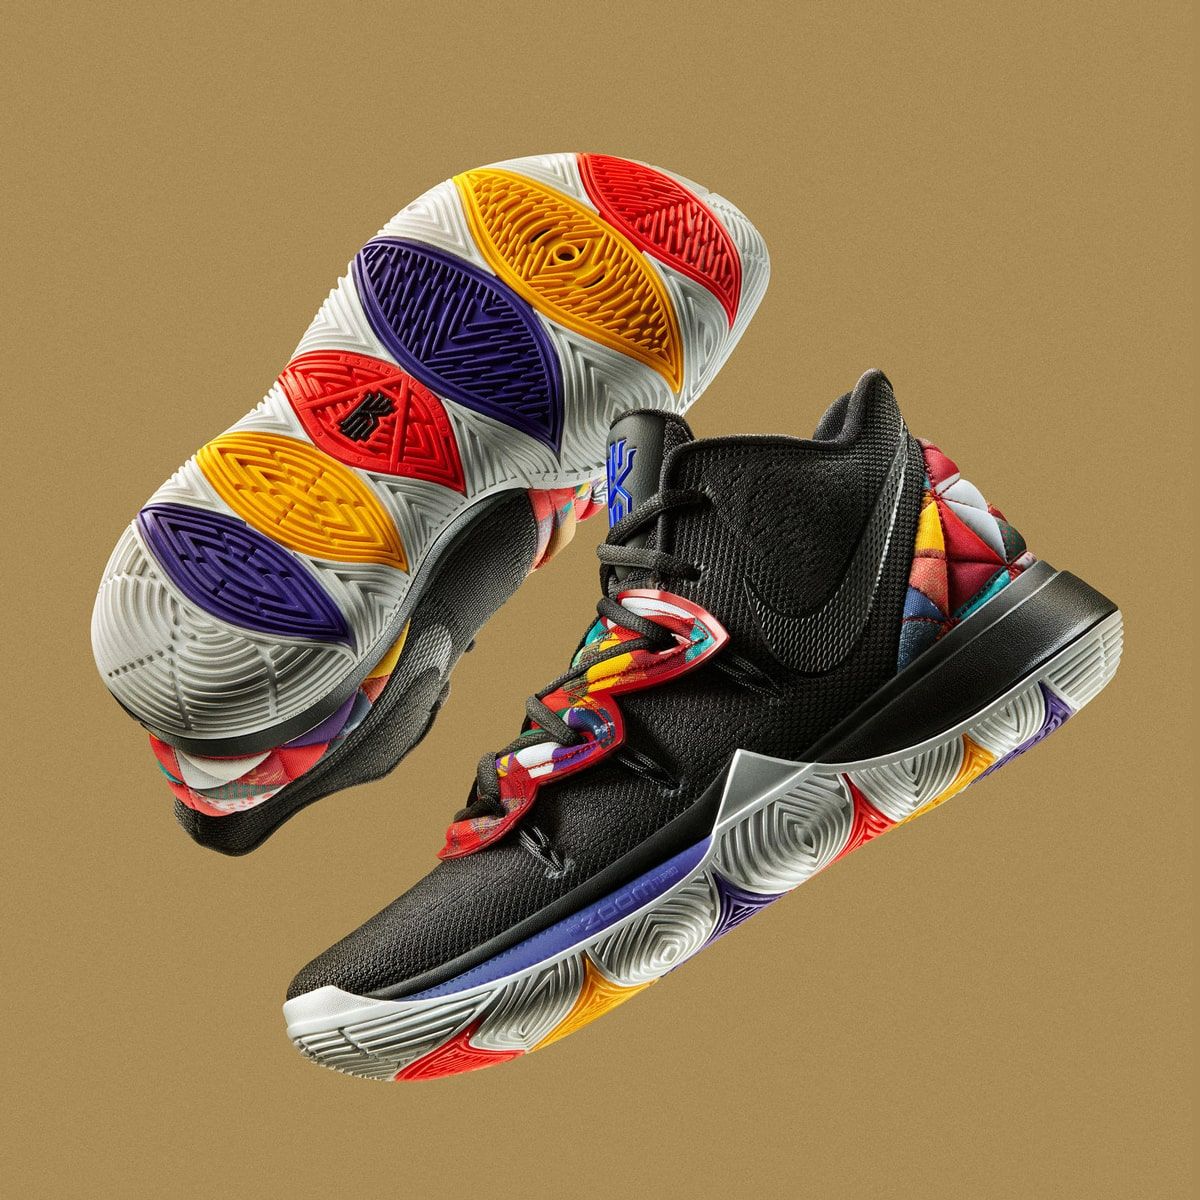 Nike Kyrie 5 PE 'Neon Blends' For Sale The Sole Line